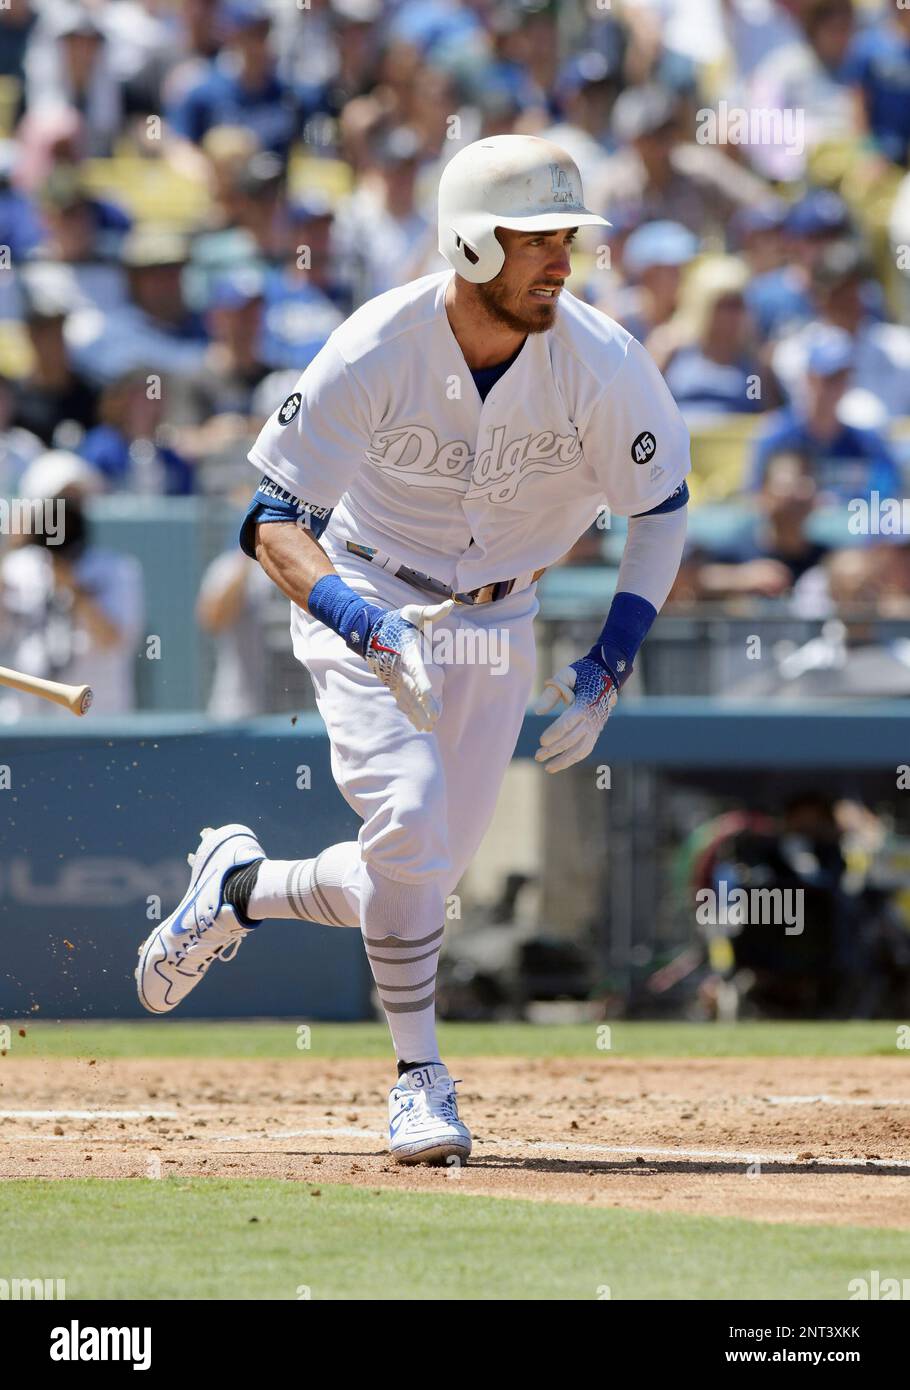 LOS ANGELES, CA - AUGUST 24: Los Angeles Dodgers right fielder Cody  Bellinger (35) hits a single in the third inning of a game against the New  York Yankees played on August